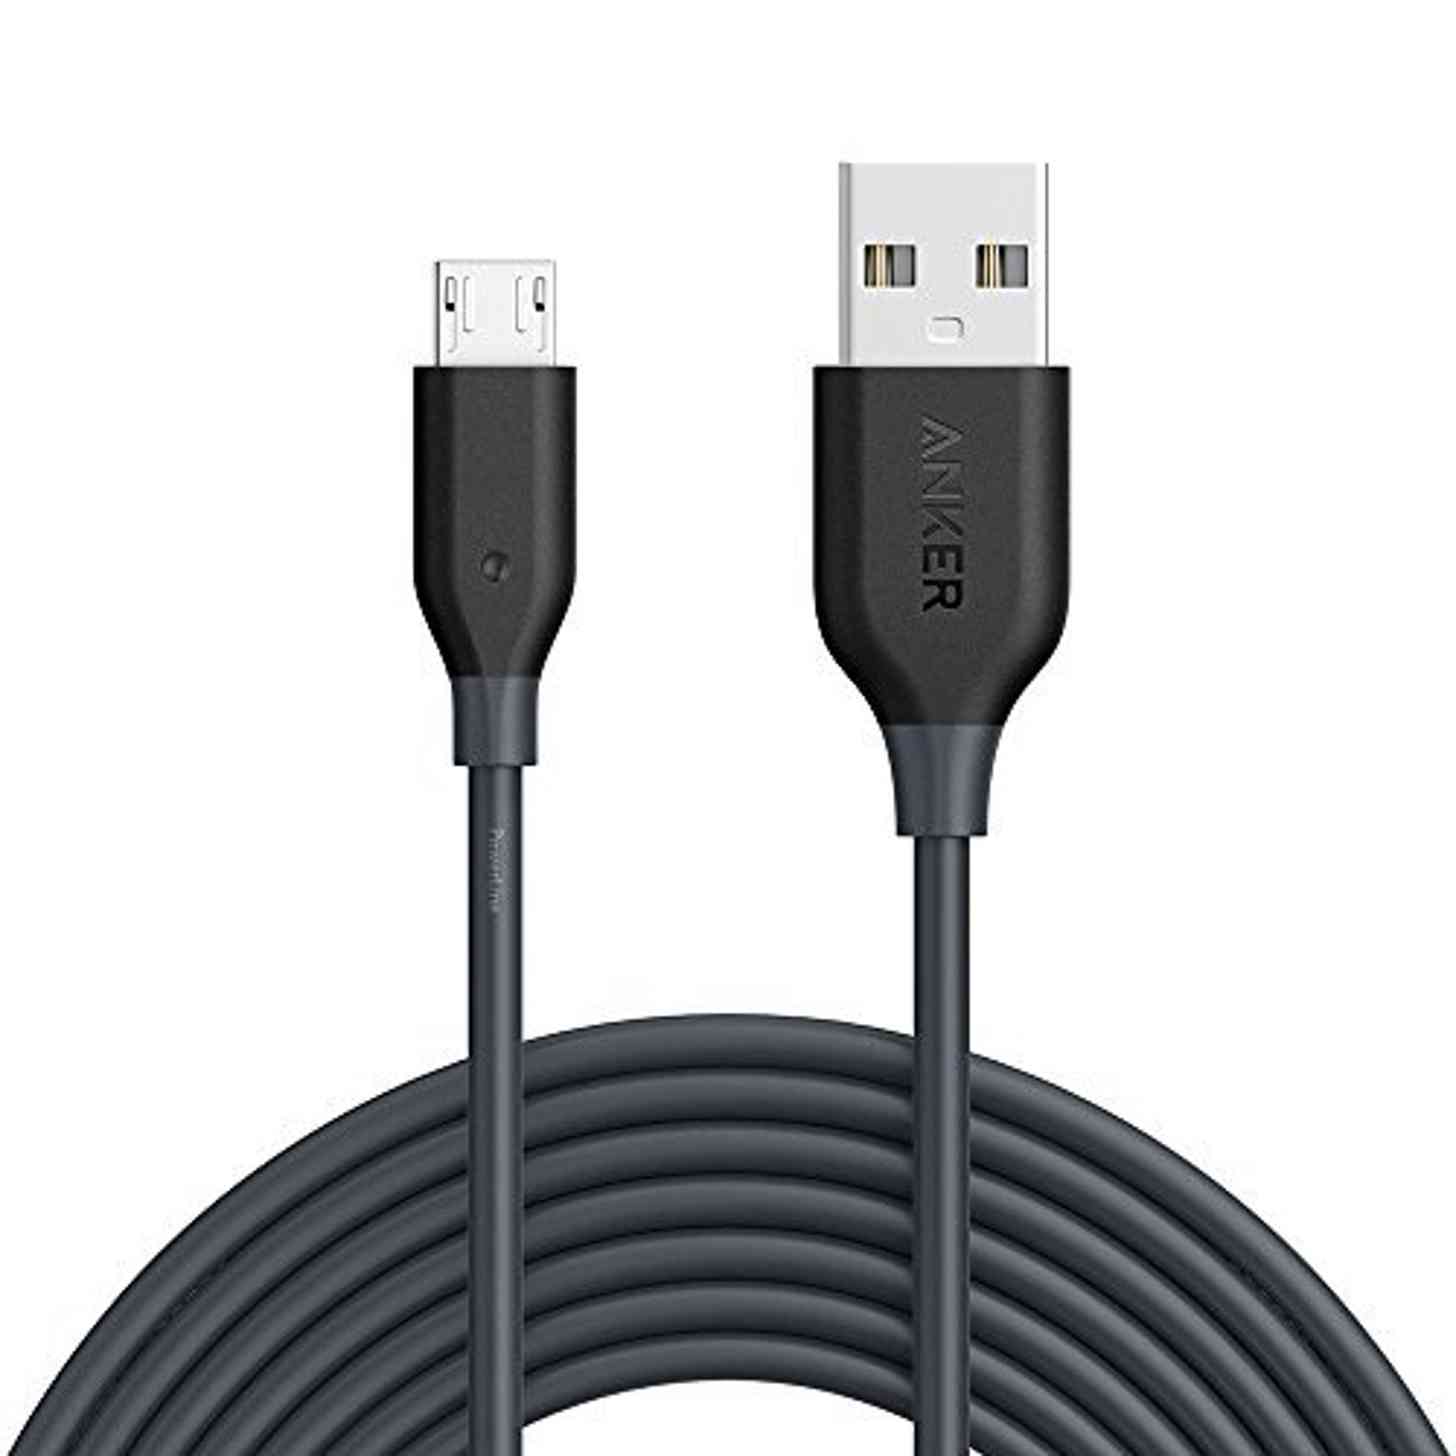 10-foot charging cable